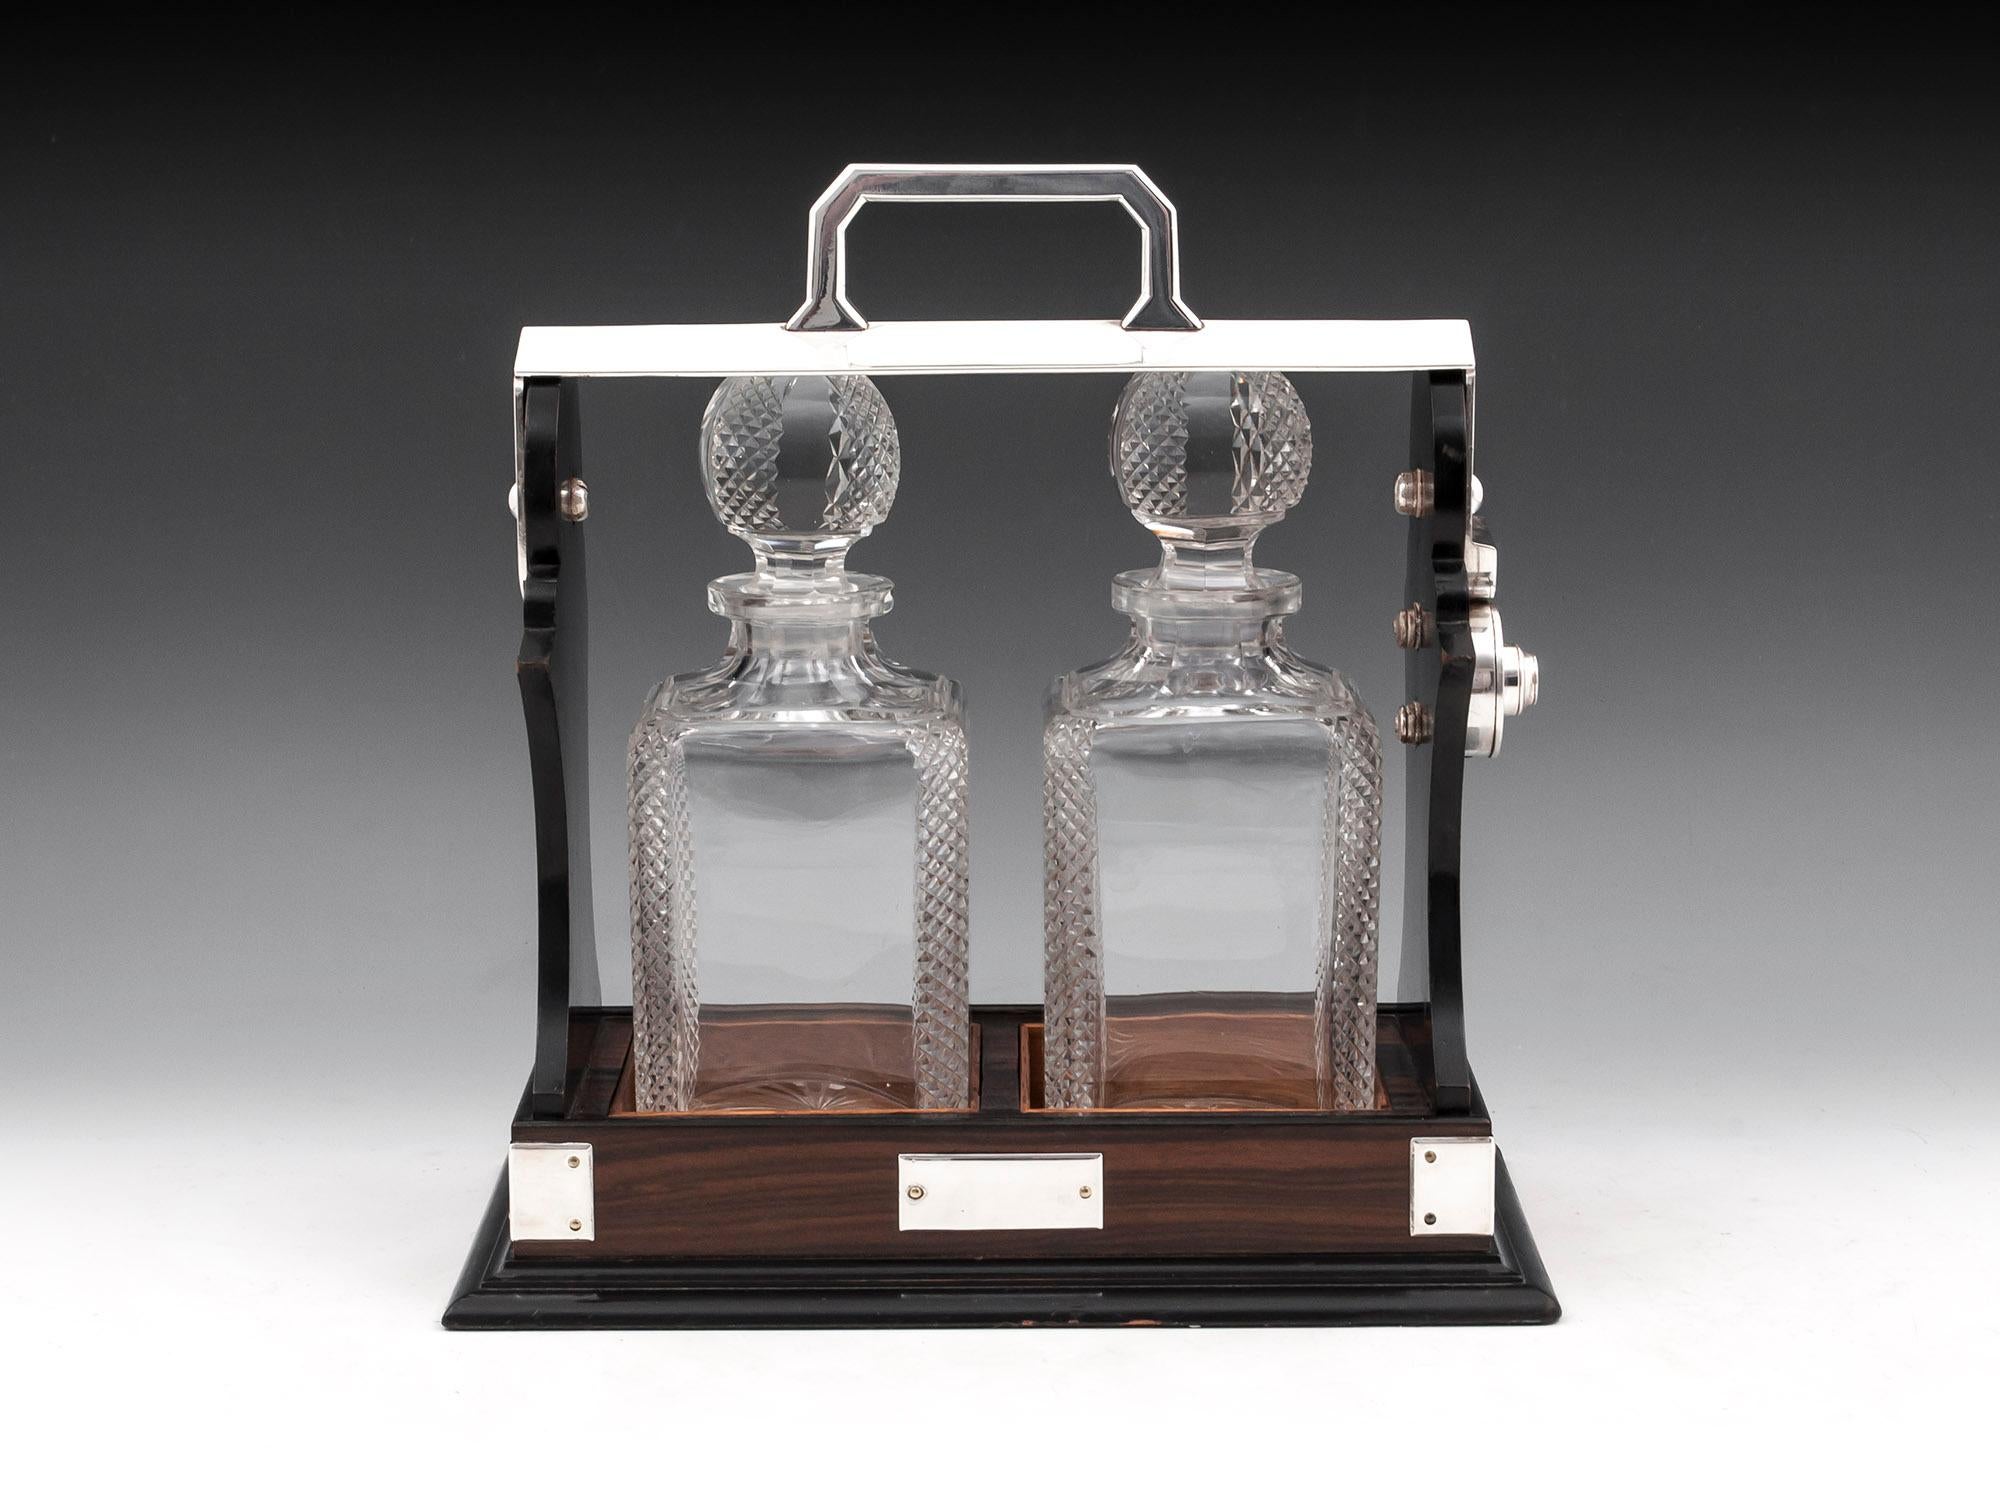 Art Deco calamander tantalus with simple square silver plated brackets around the base and vacant initial plaque. The top has a silver plated swing arm holding the two fabulous lead crystal decanters, each with chamfered corners with a diamond cut